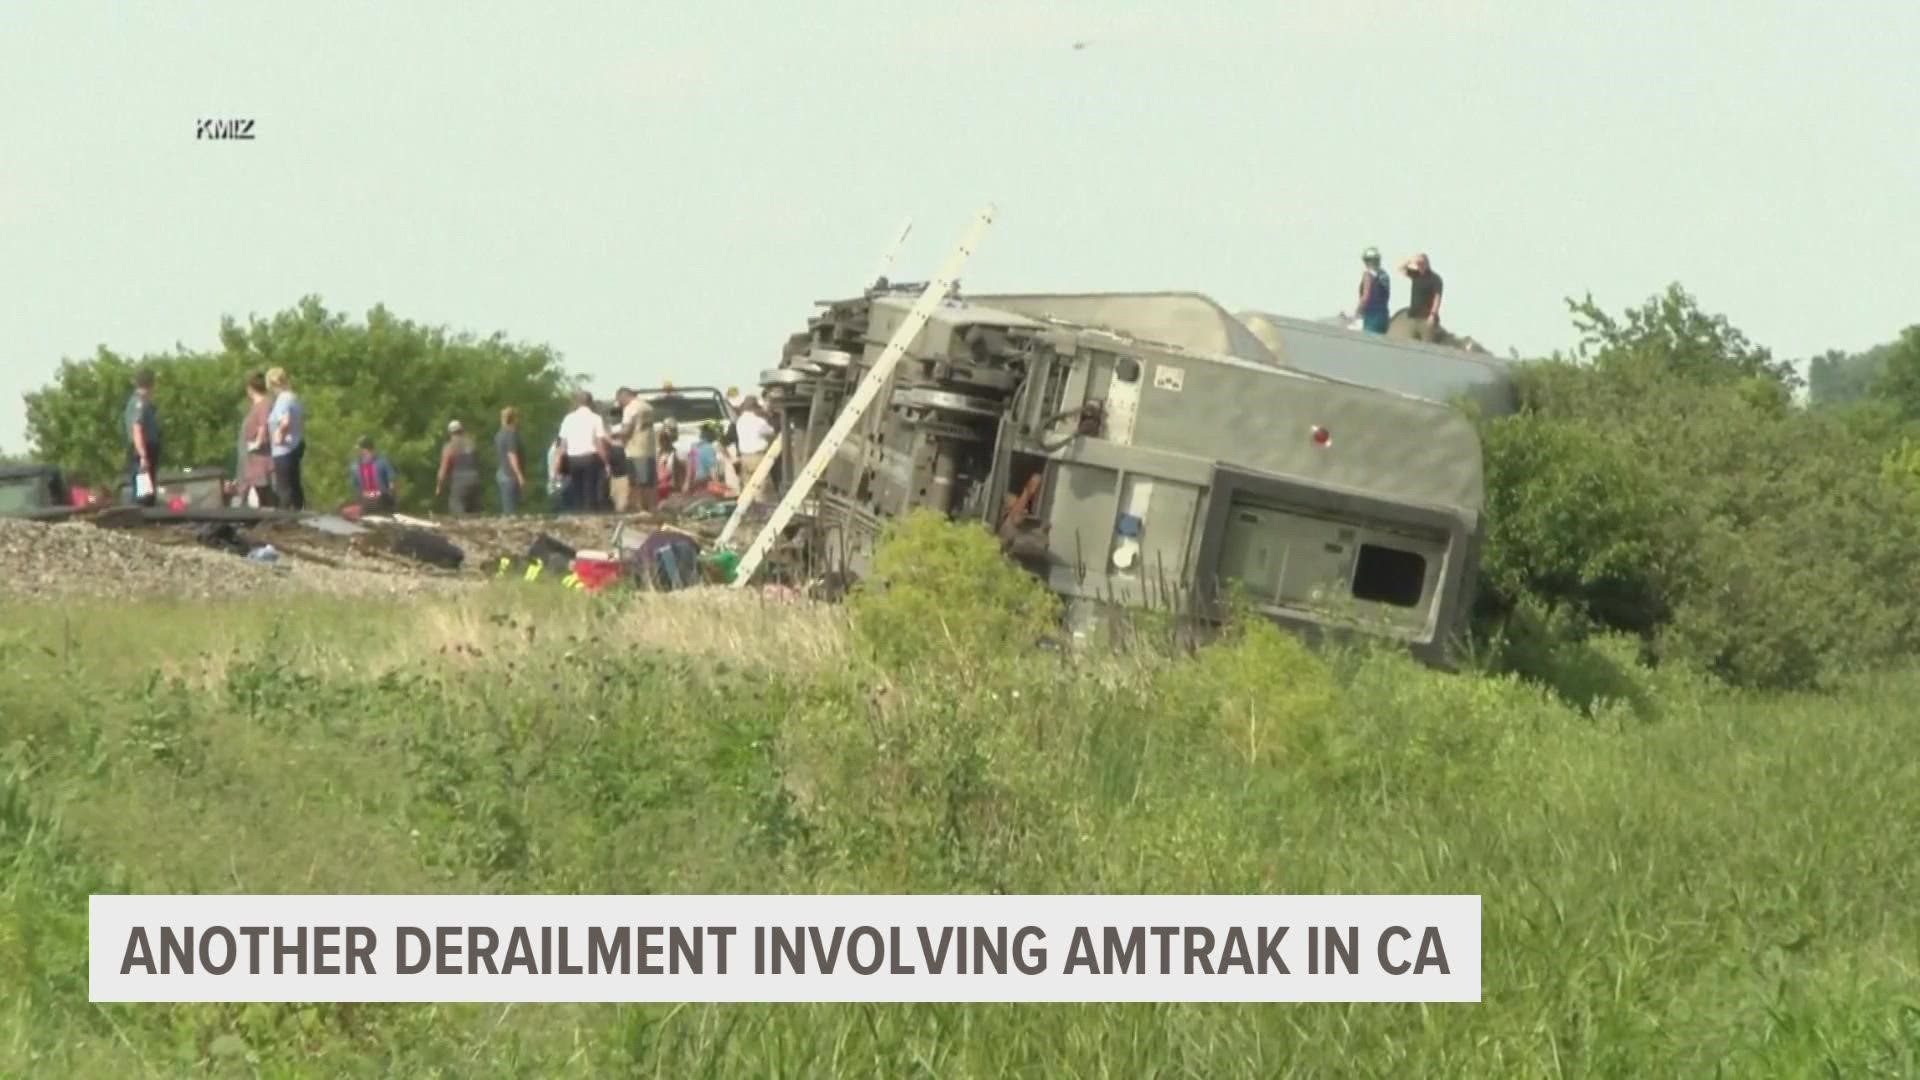 One person inside the dump truck and two people on the train were killed, a Missouri Highway Patrol spokesman said in a press conference.